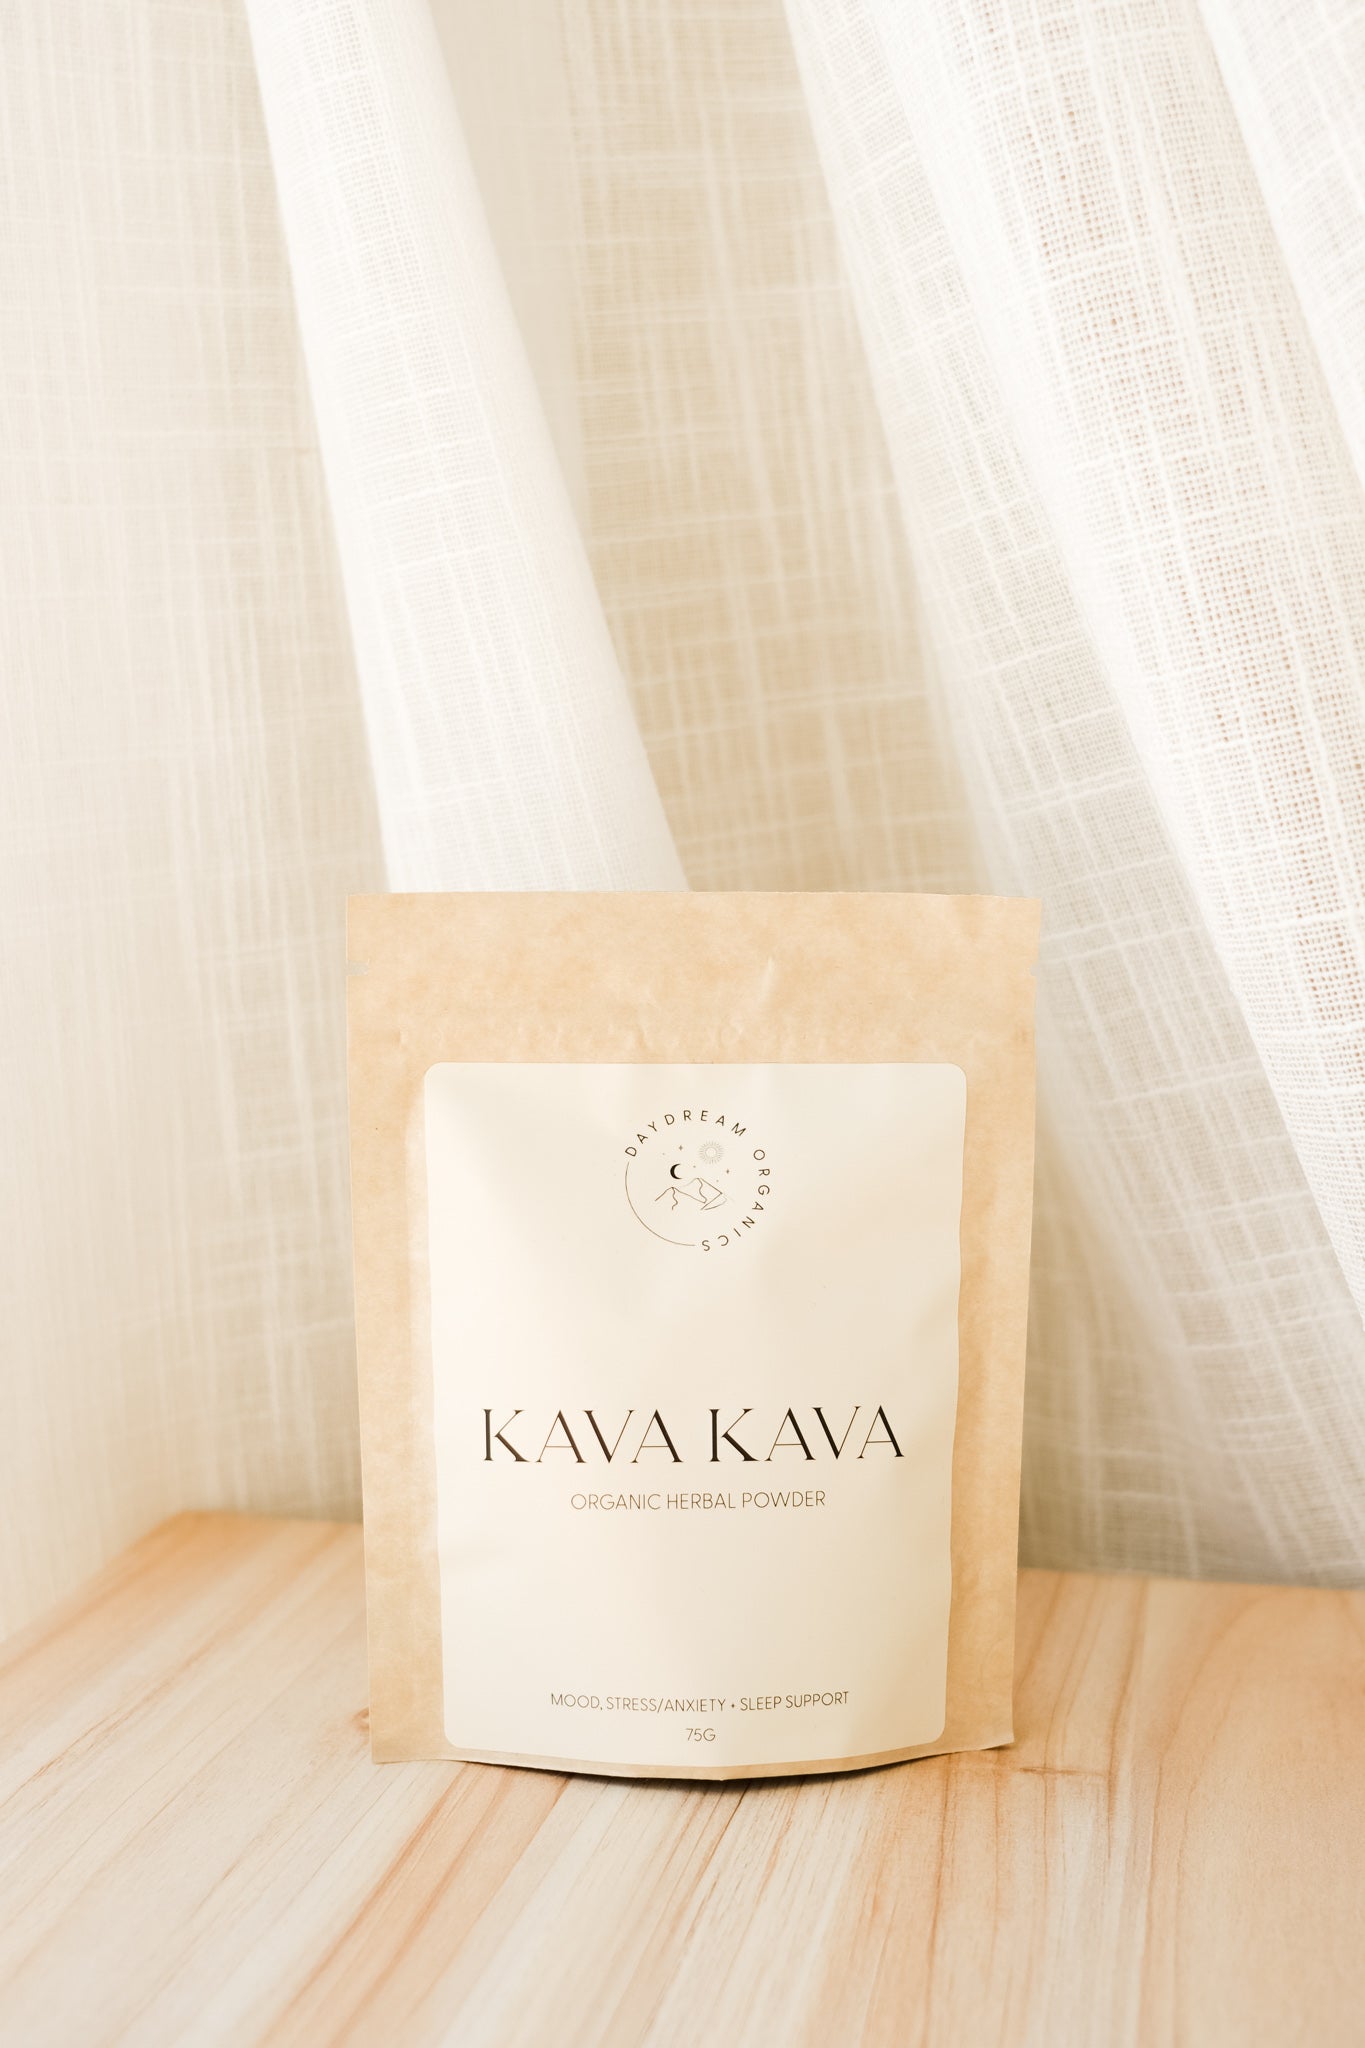 Cherished for centuries in the South Pacific, Kava Kava is an ancient plant medicine that has been revered as a natural remedy for stress relief due to it's ability to promote relaxation, ease stress and anxiety, support better sleep and evoke mellow moods. 